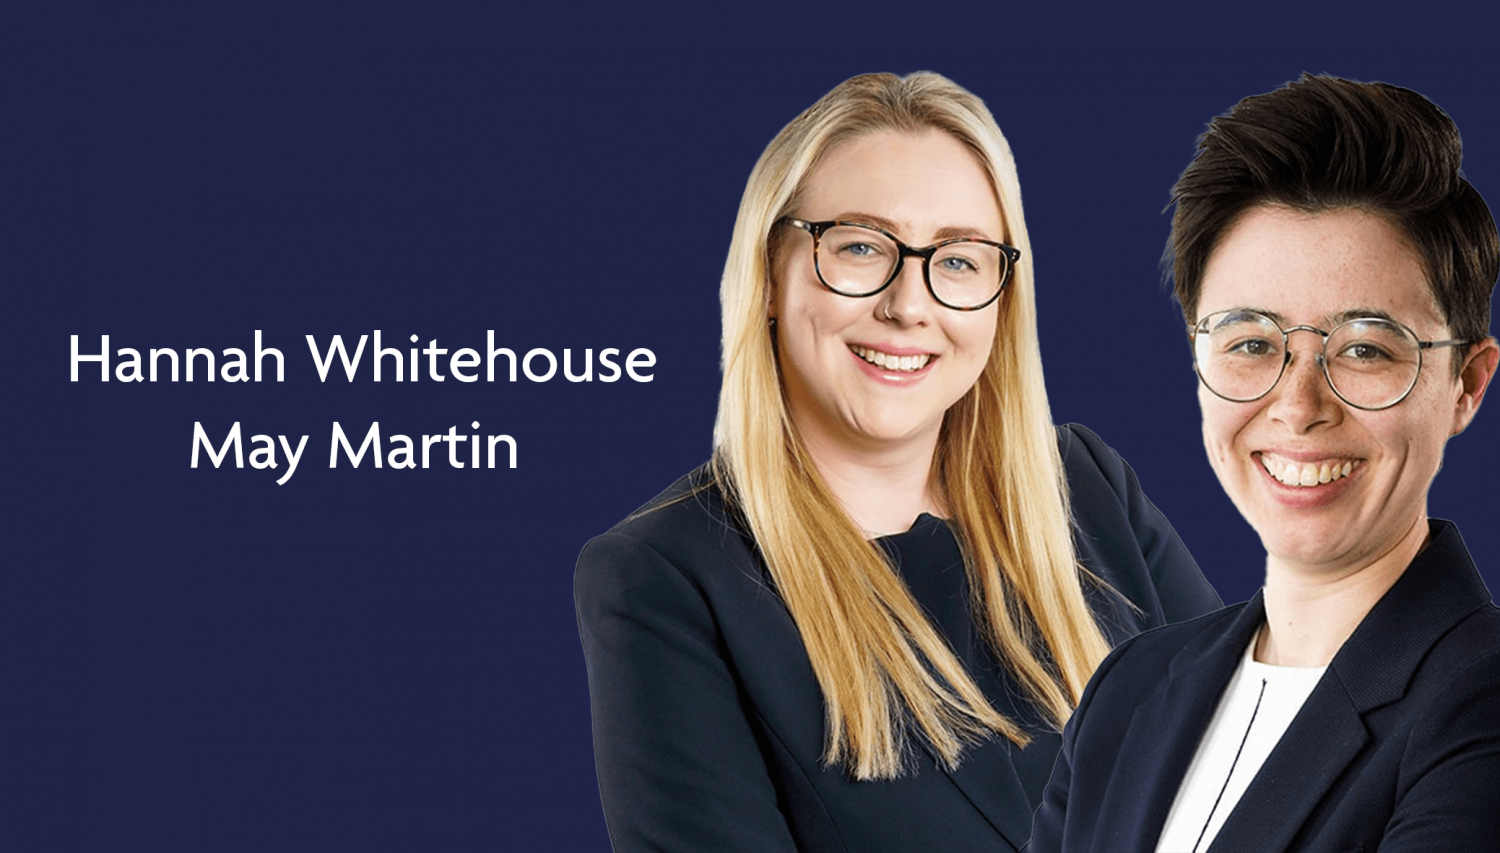 Parklane Plowden’s Hannah Whitehouse and May Martin are featured in the March edition of the Family Law Journal